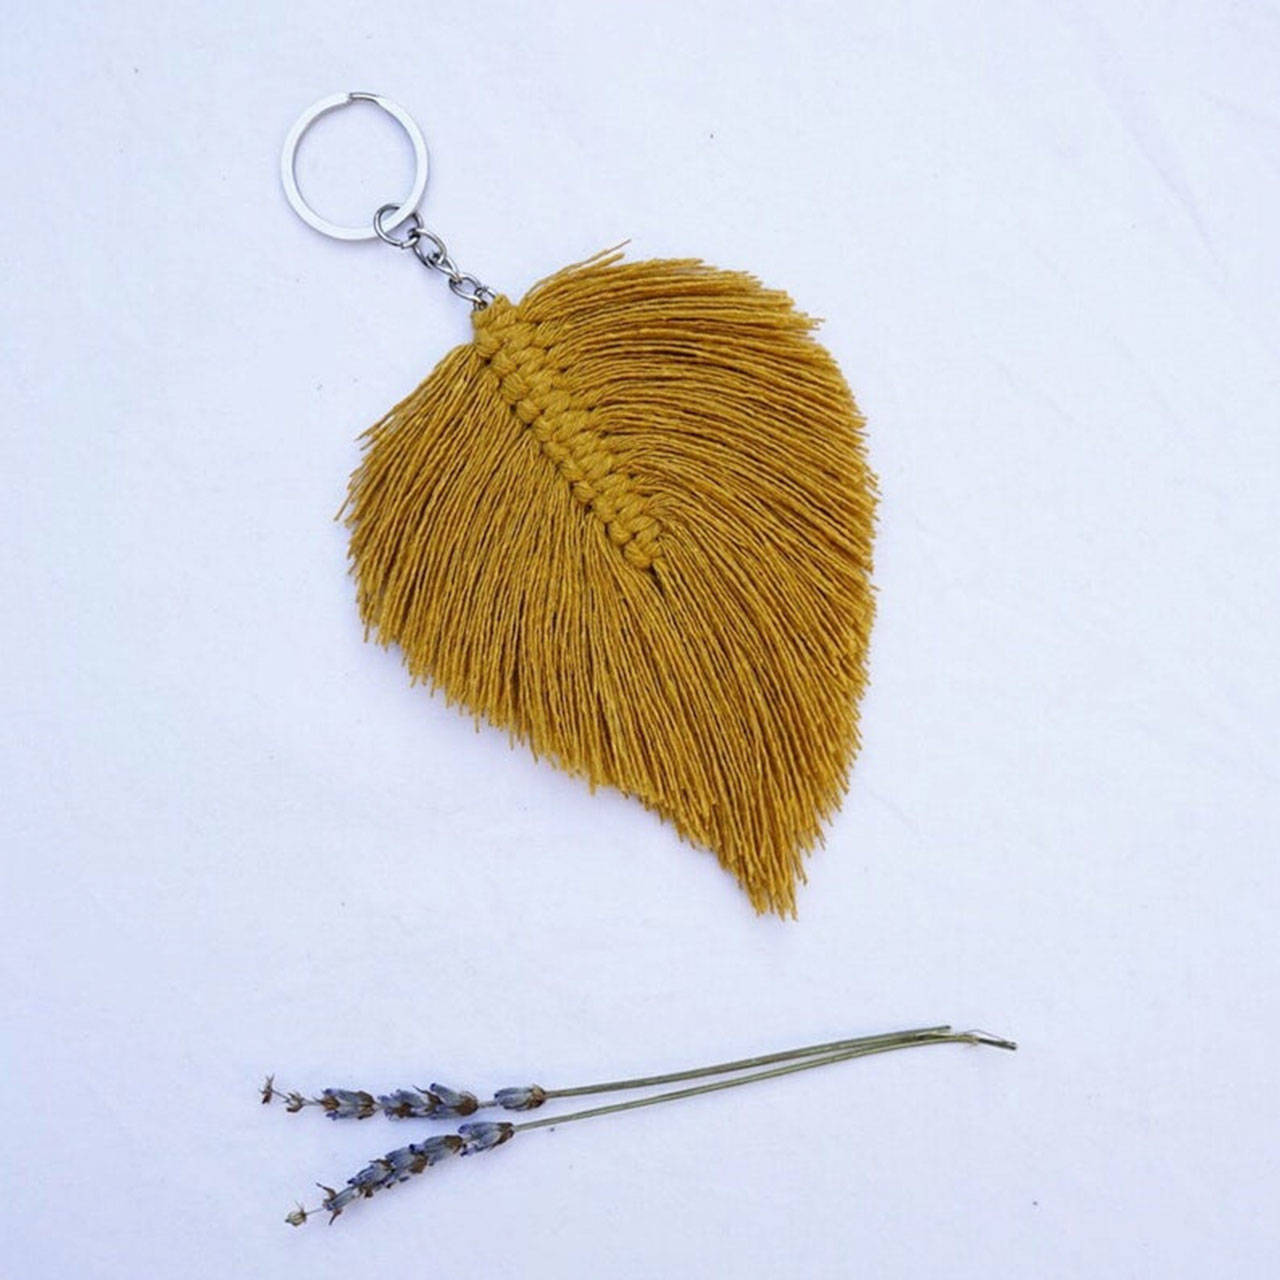 Local libraries offer leaf macramé keychain take-and-make kits, available for pickup until supplies run out. Submitted photo